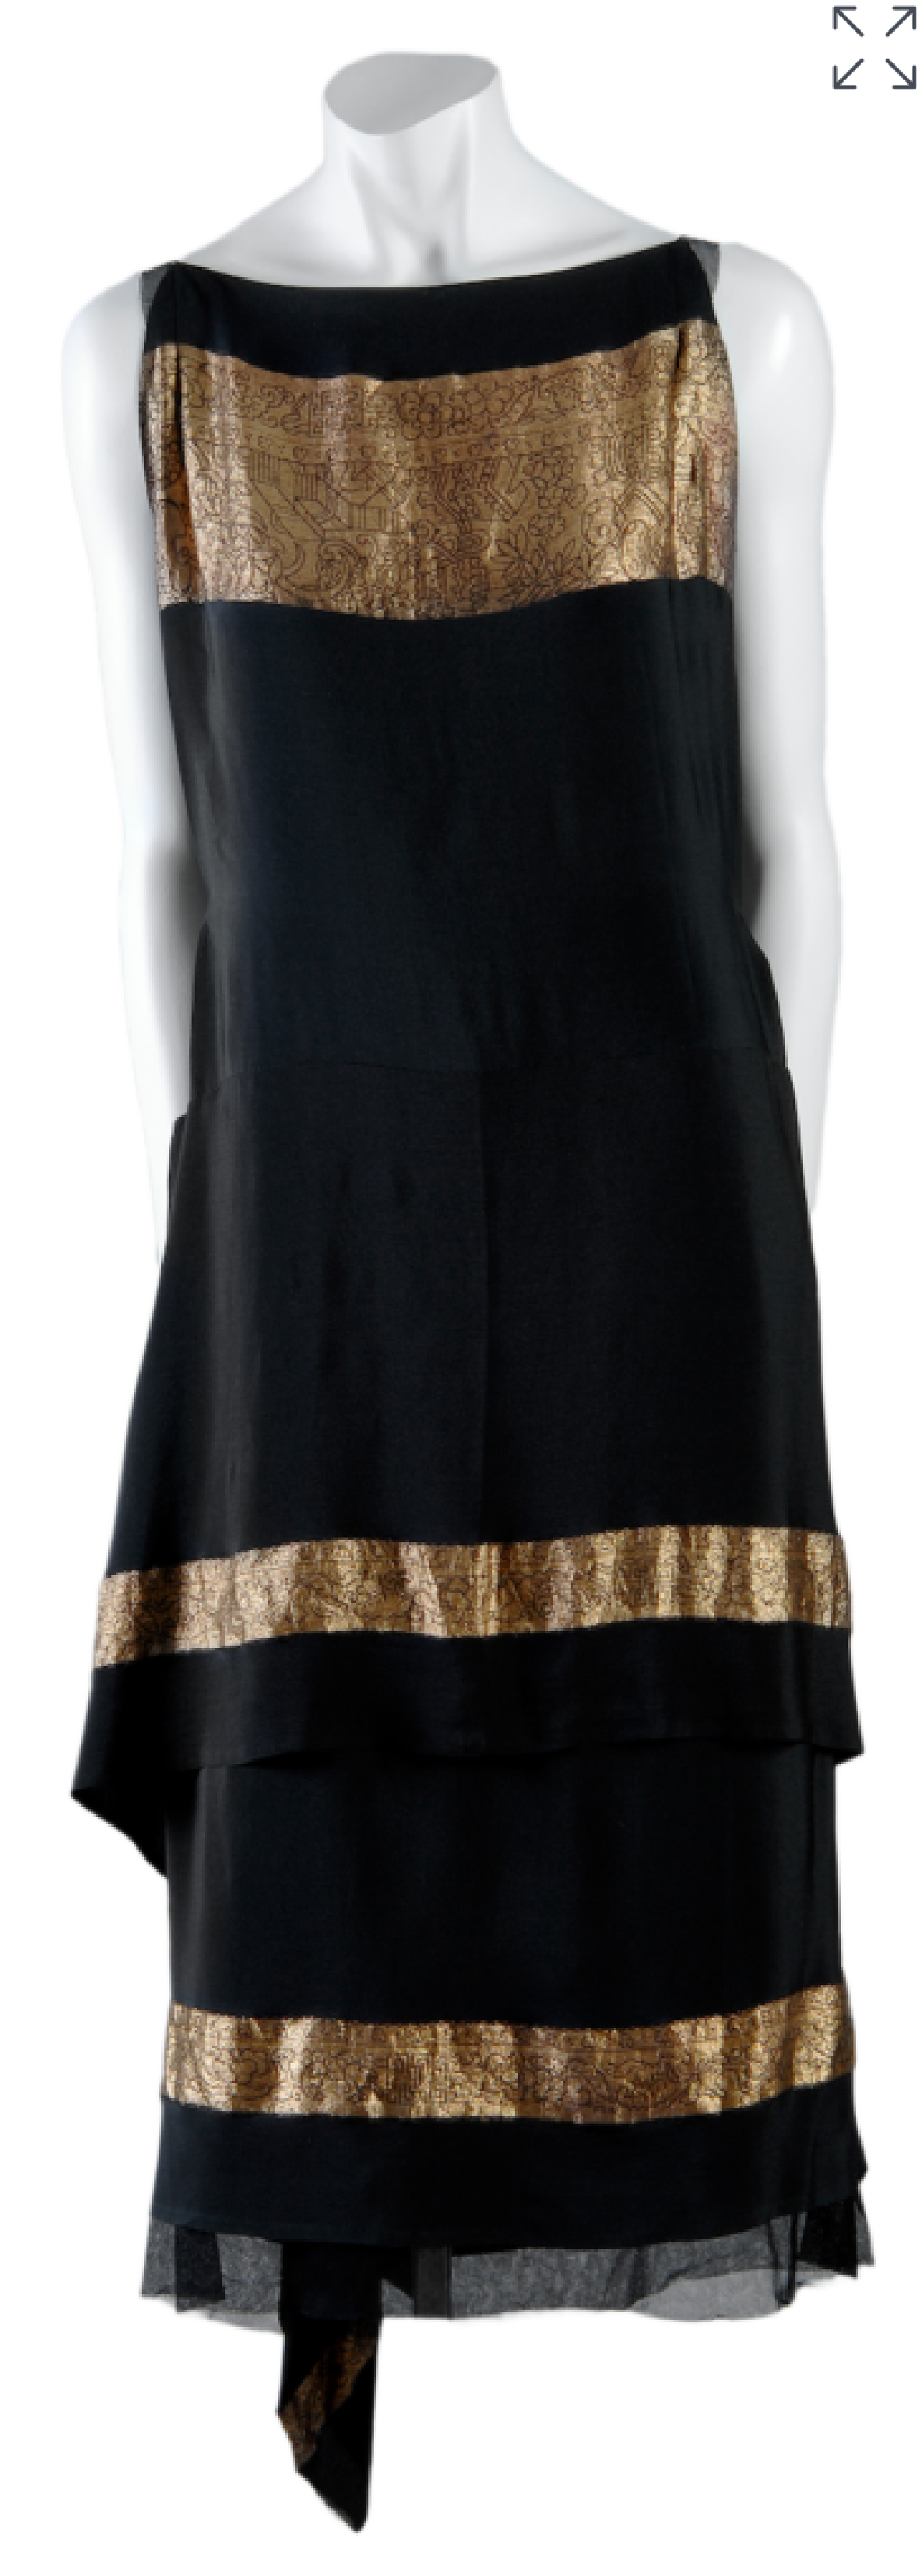 Front view of 1924 Callor Soeurs sleeveless black silk crepe de chine and tulle evening dress with a shorter flounce above the the dress hem. A wide gold band at the collar bones and just before the hem of the flounce and dress.